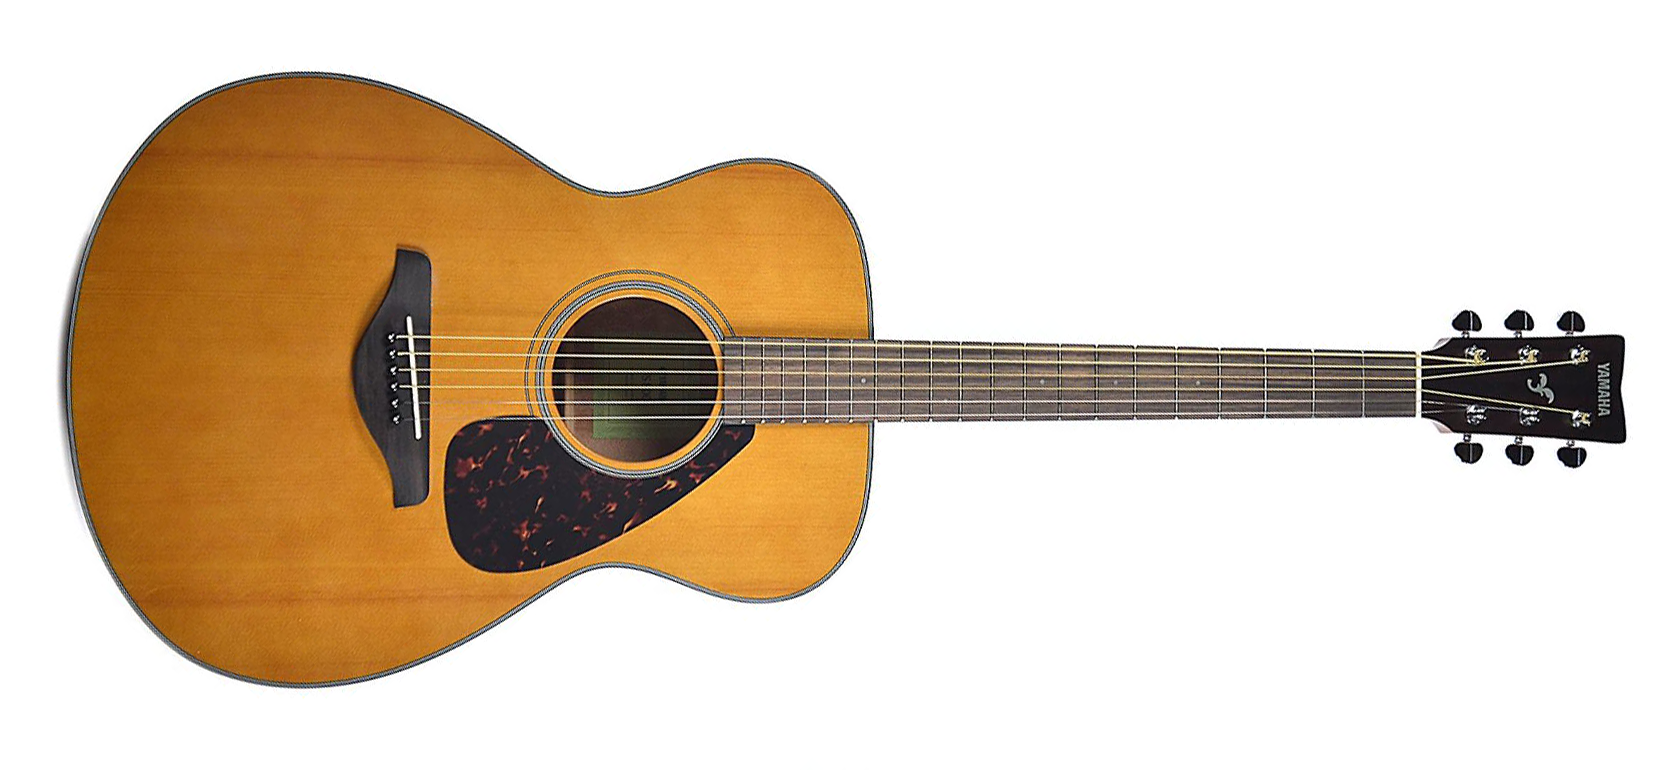 Yamaha FS800 T Concert Limited Edition 6-String RH Acoustic Guitar-Tinted Natural Top